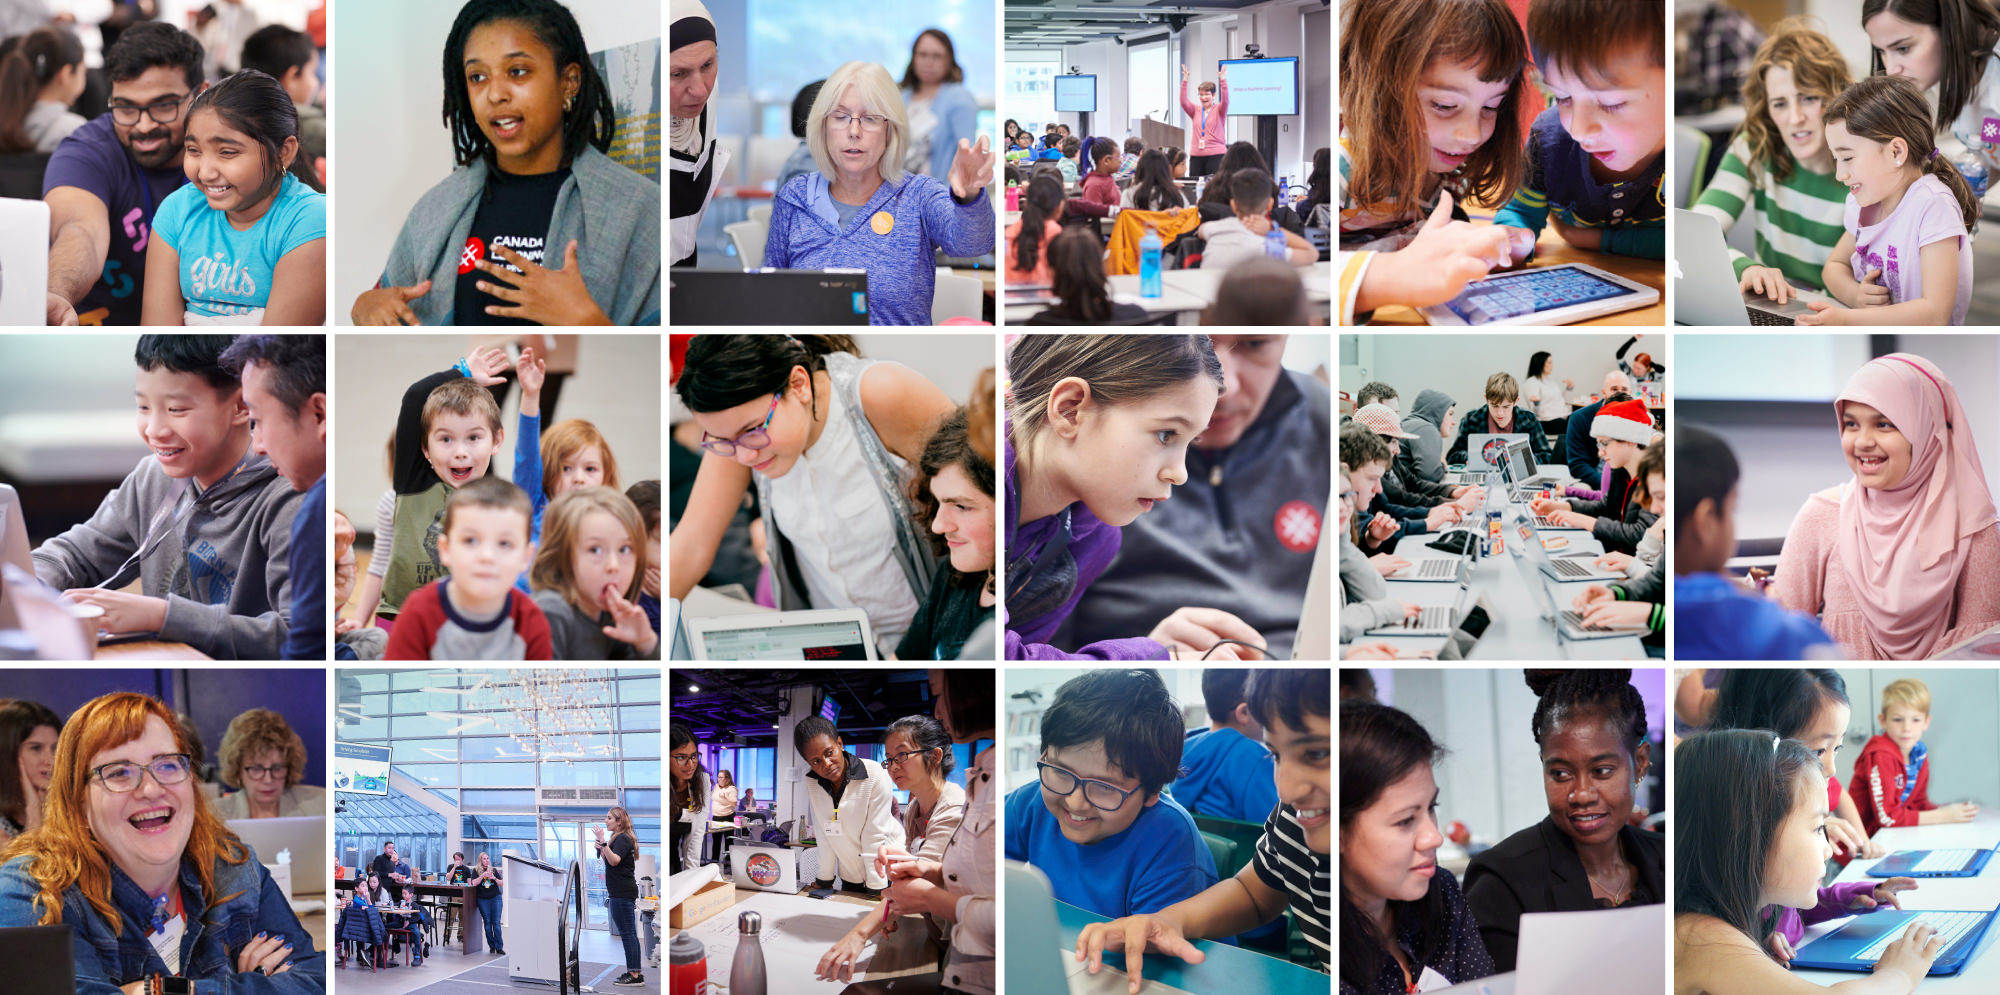 A grid of user-generated images depicting live, in-person learning events